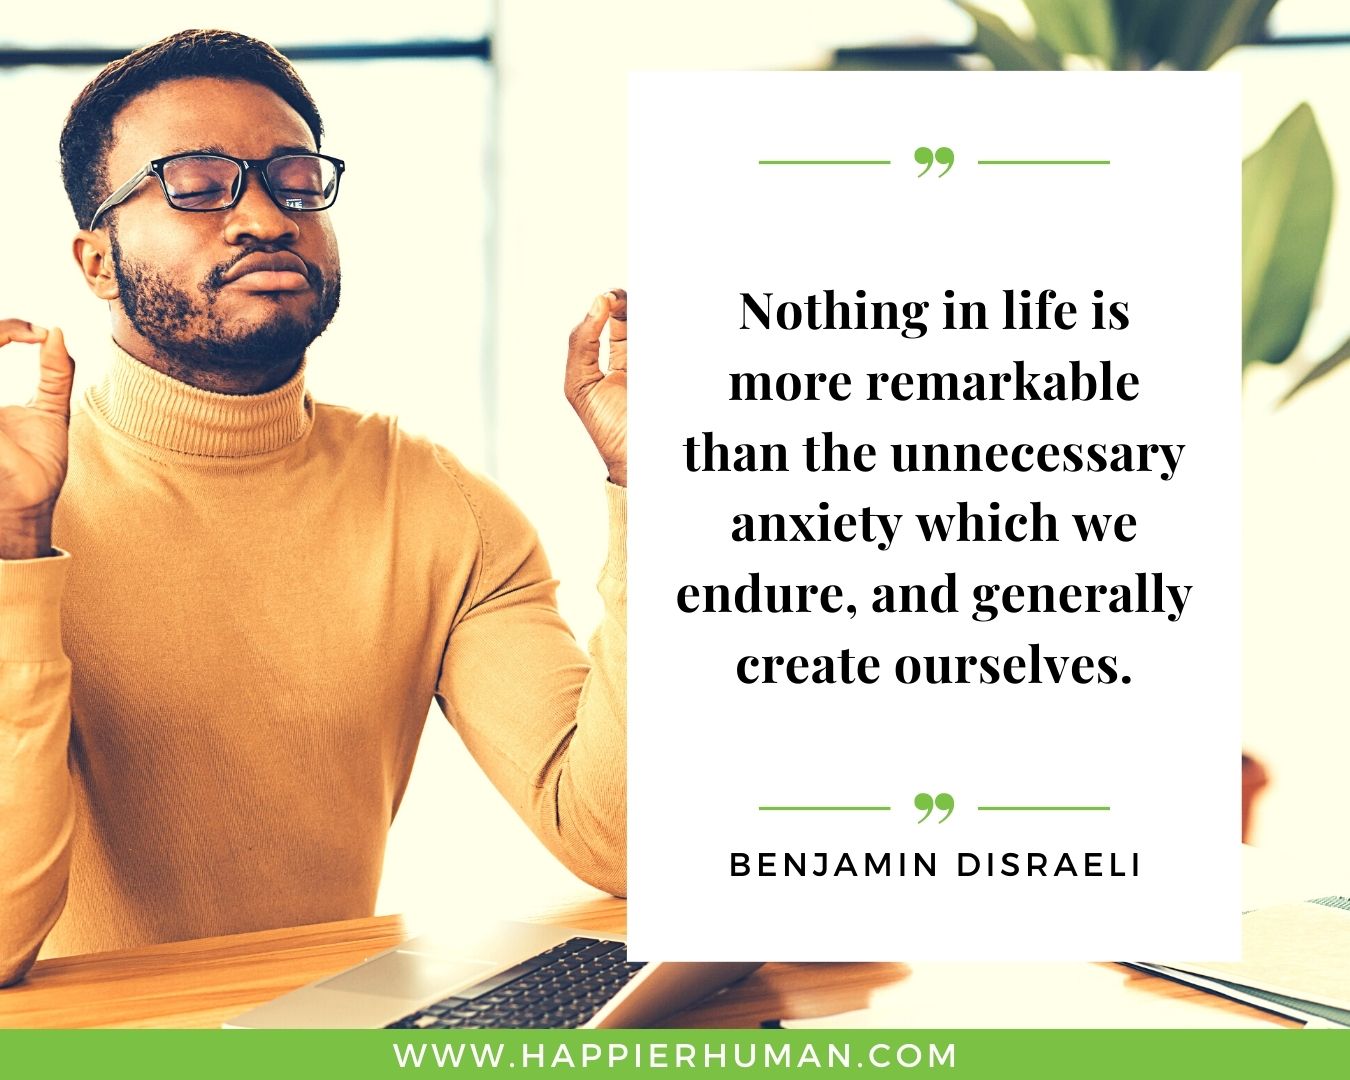 Overthinking Quotes - "Nothing in life is more remarkable than the unnecessary anxiety which we endure, and generally create ourselves." - Benjamin Disraeli.